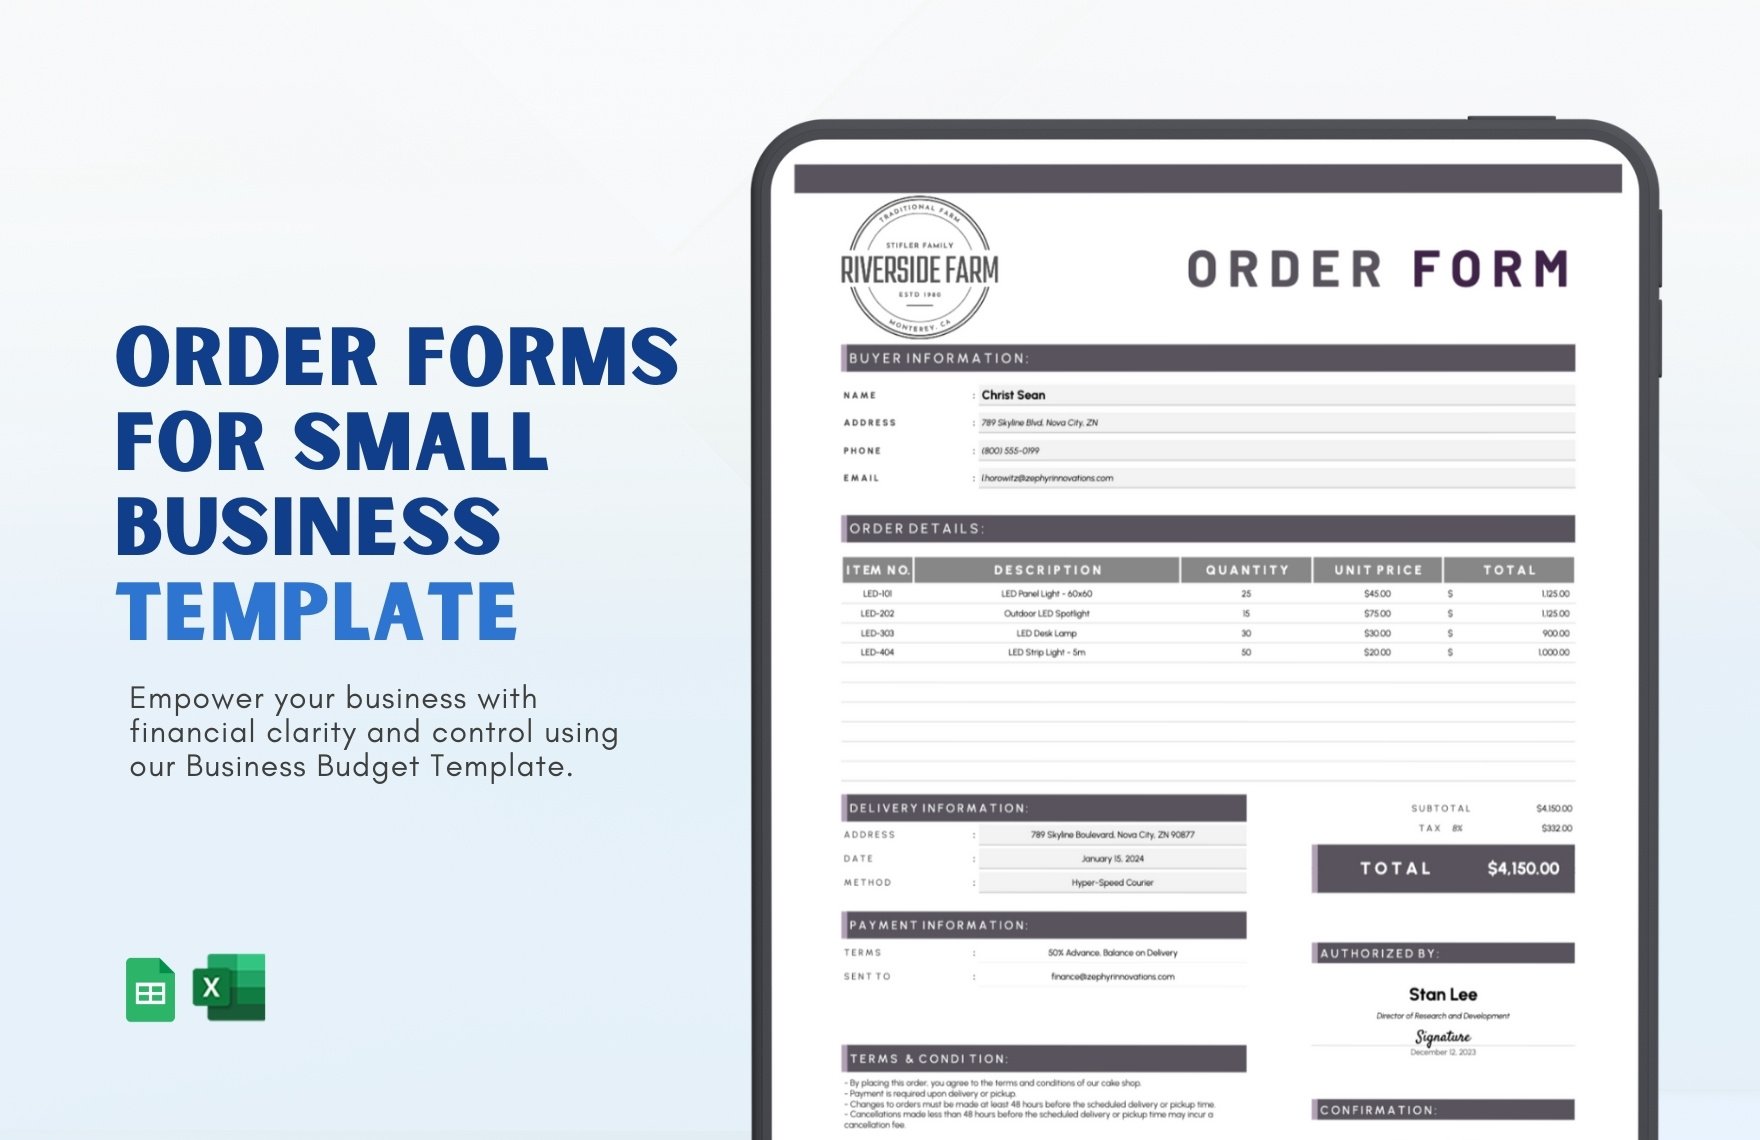 Order Forms for Small Business Template in Excel, Google Sheets